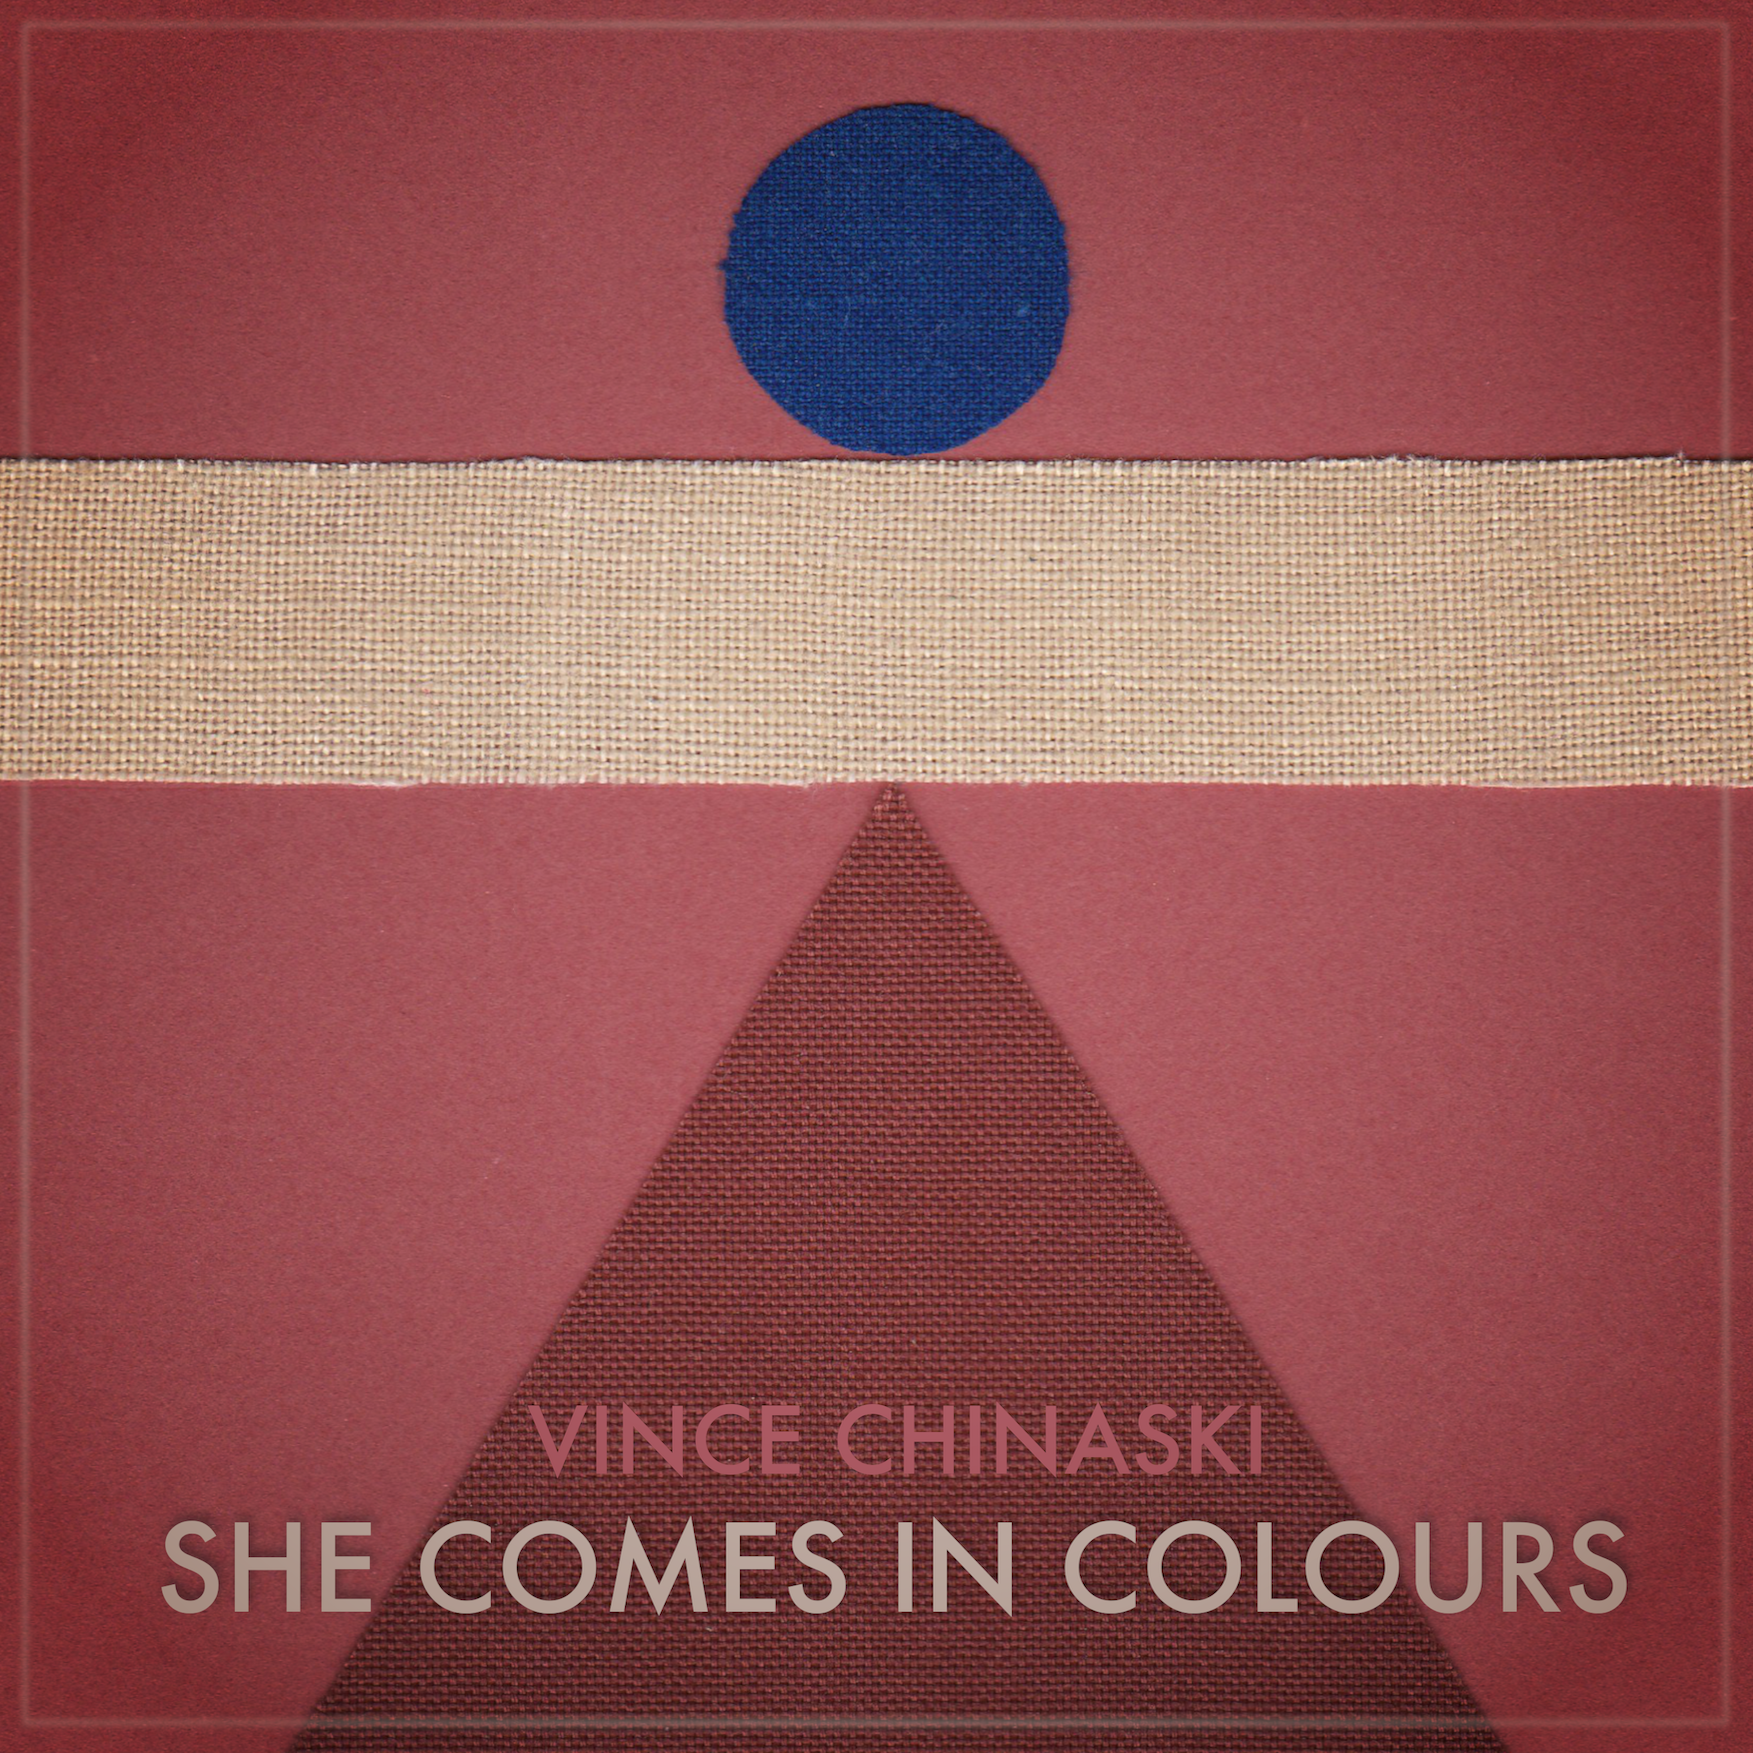 Vince Chinaski – “She Comes In Colours”